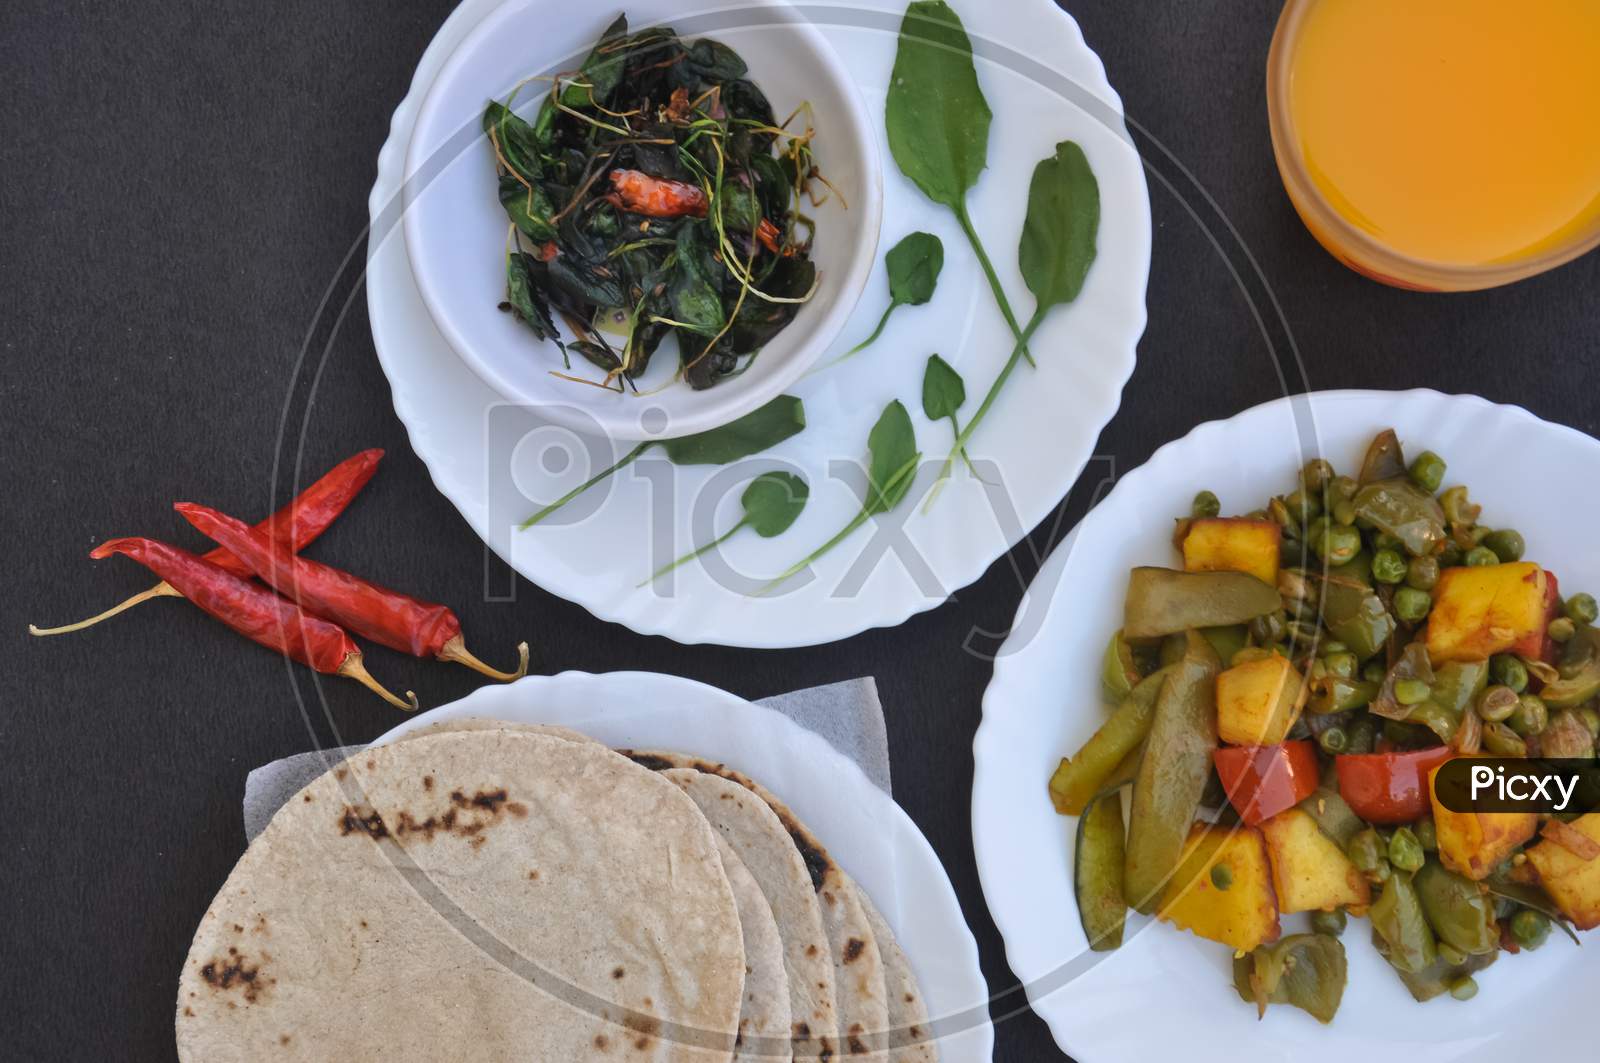 High angle of matar paneer mix veg, saag (greens) and roti (Indian bread) on white plates and juice on glass over black table